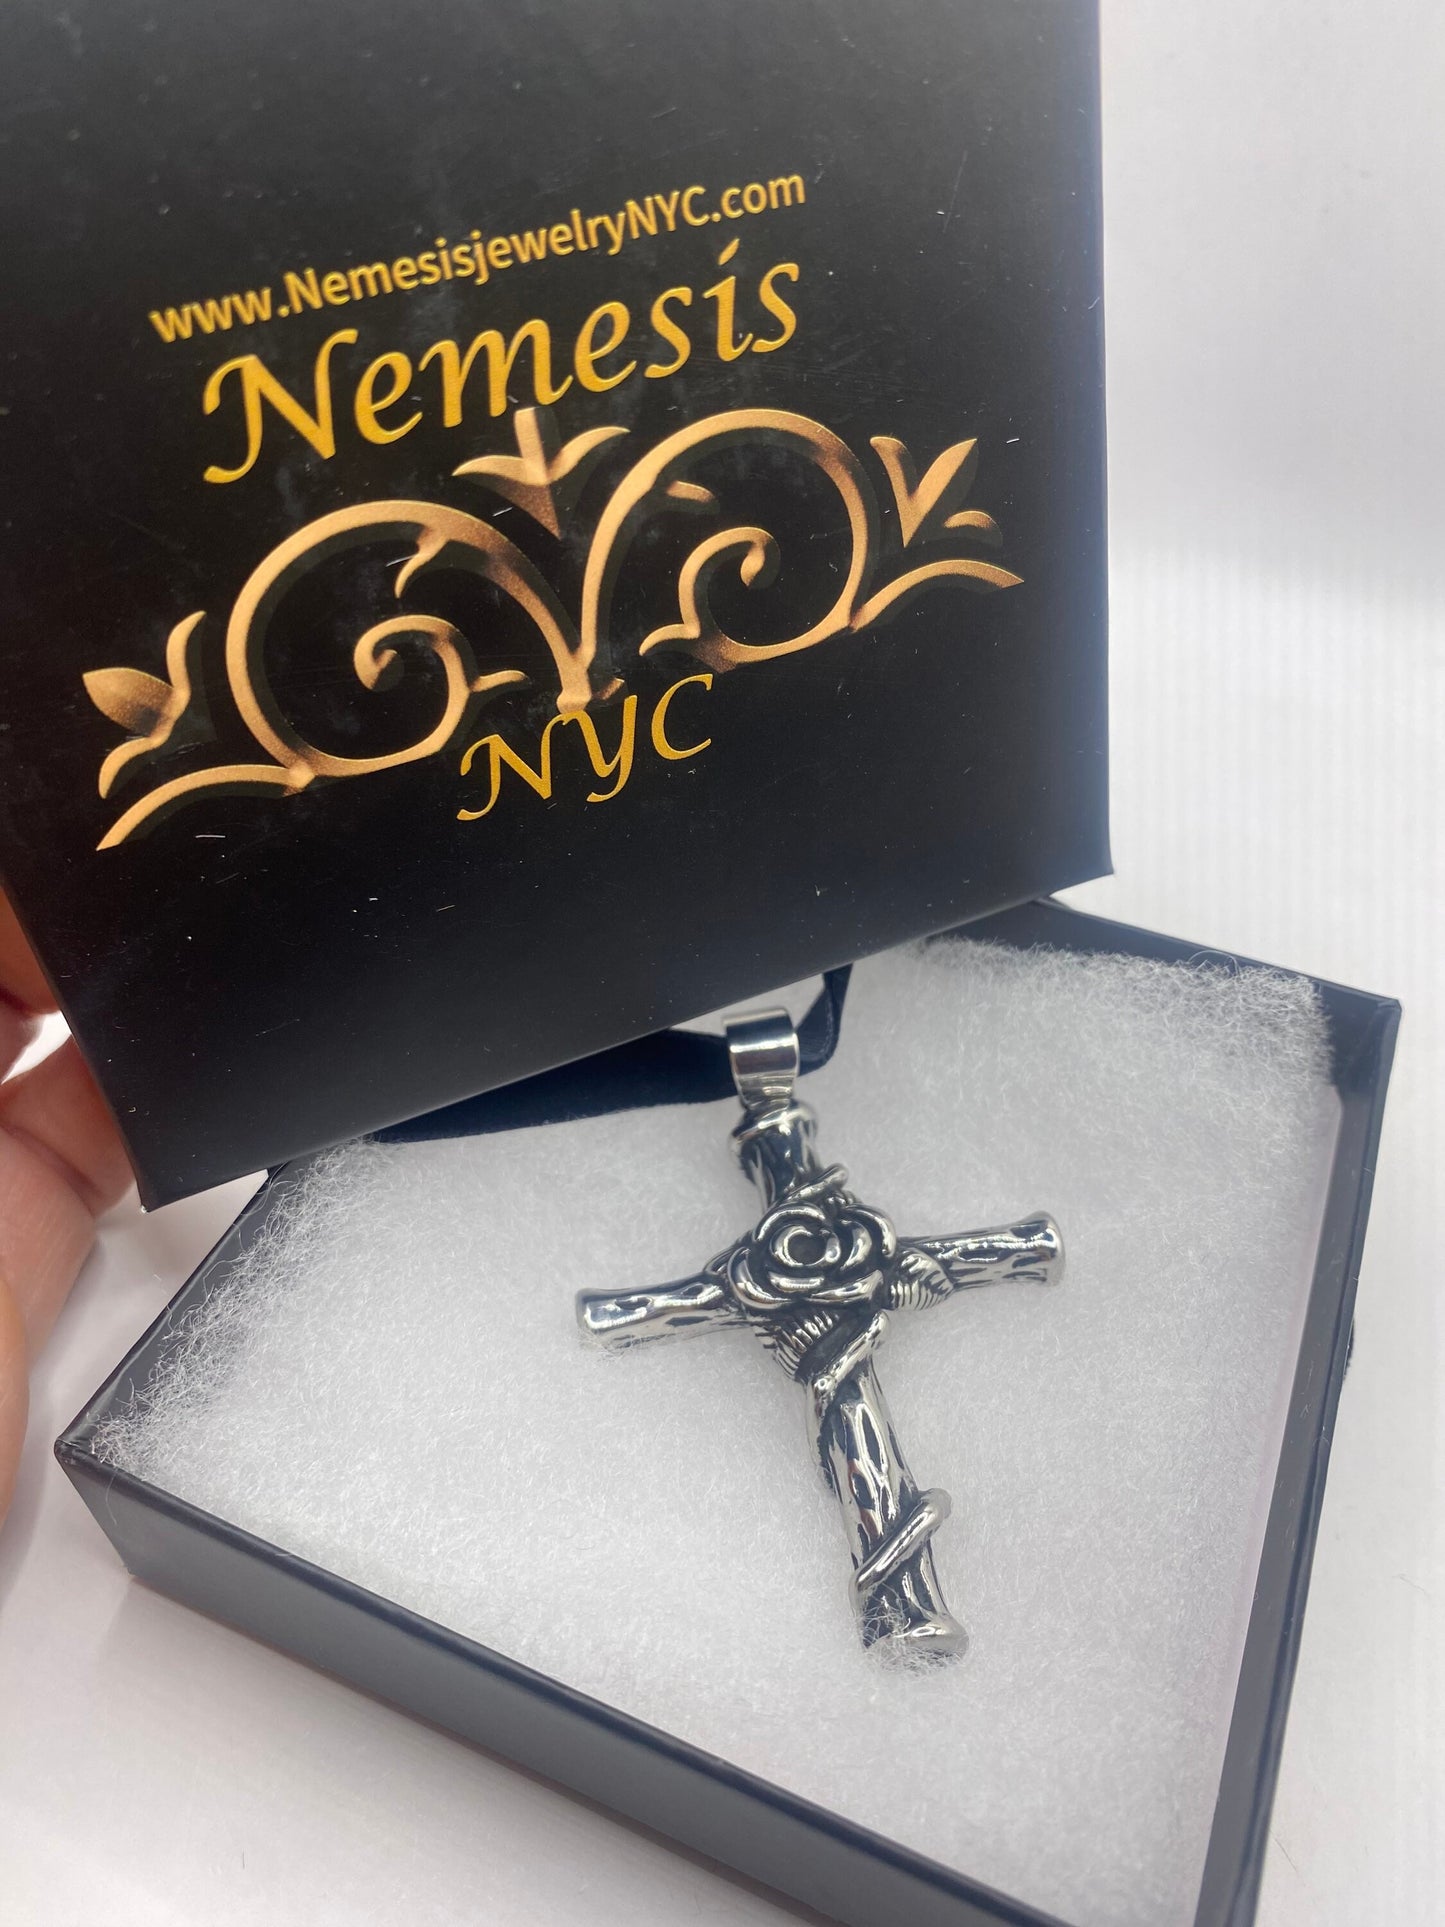 vintage Celtic Stainless Steel Cross pendant necklace